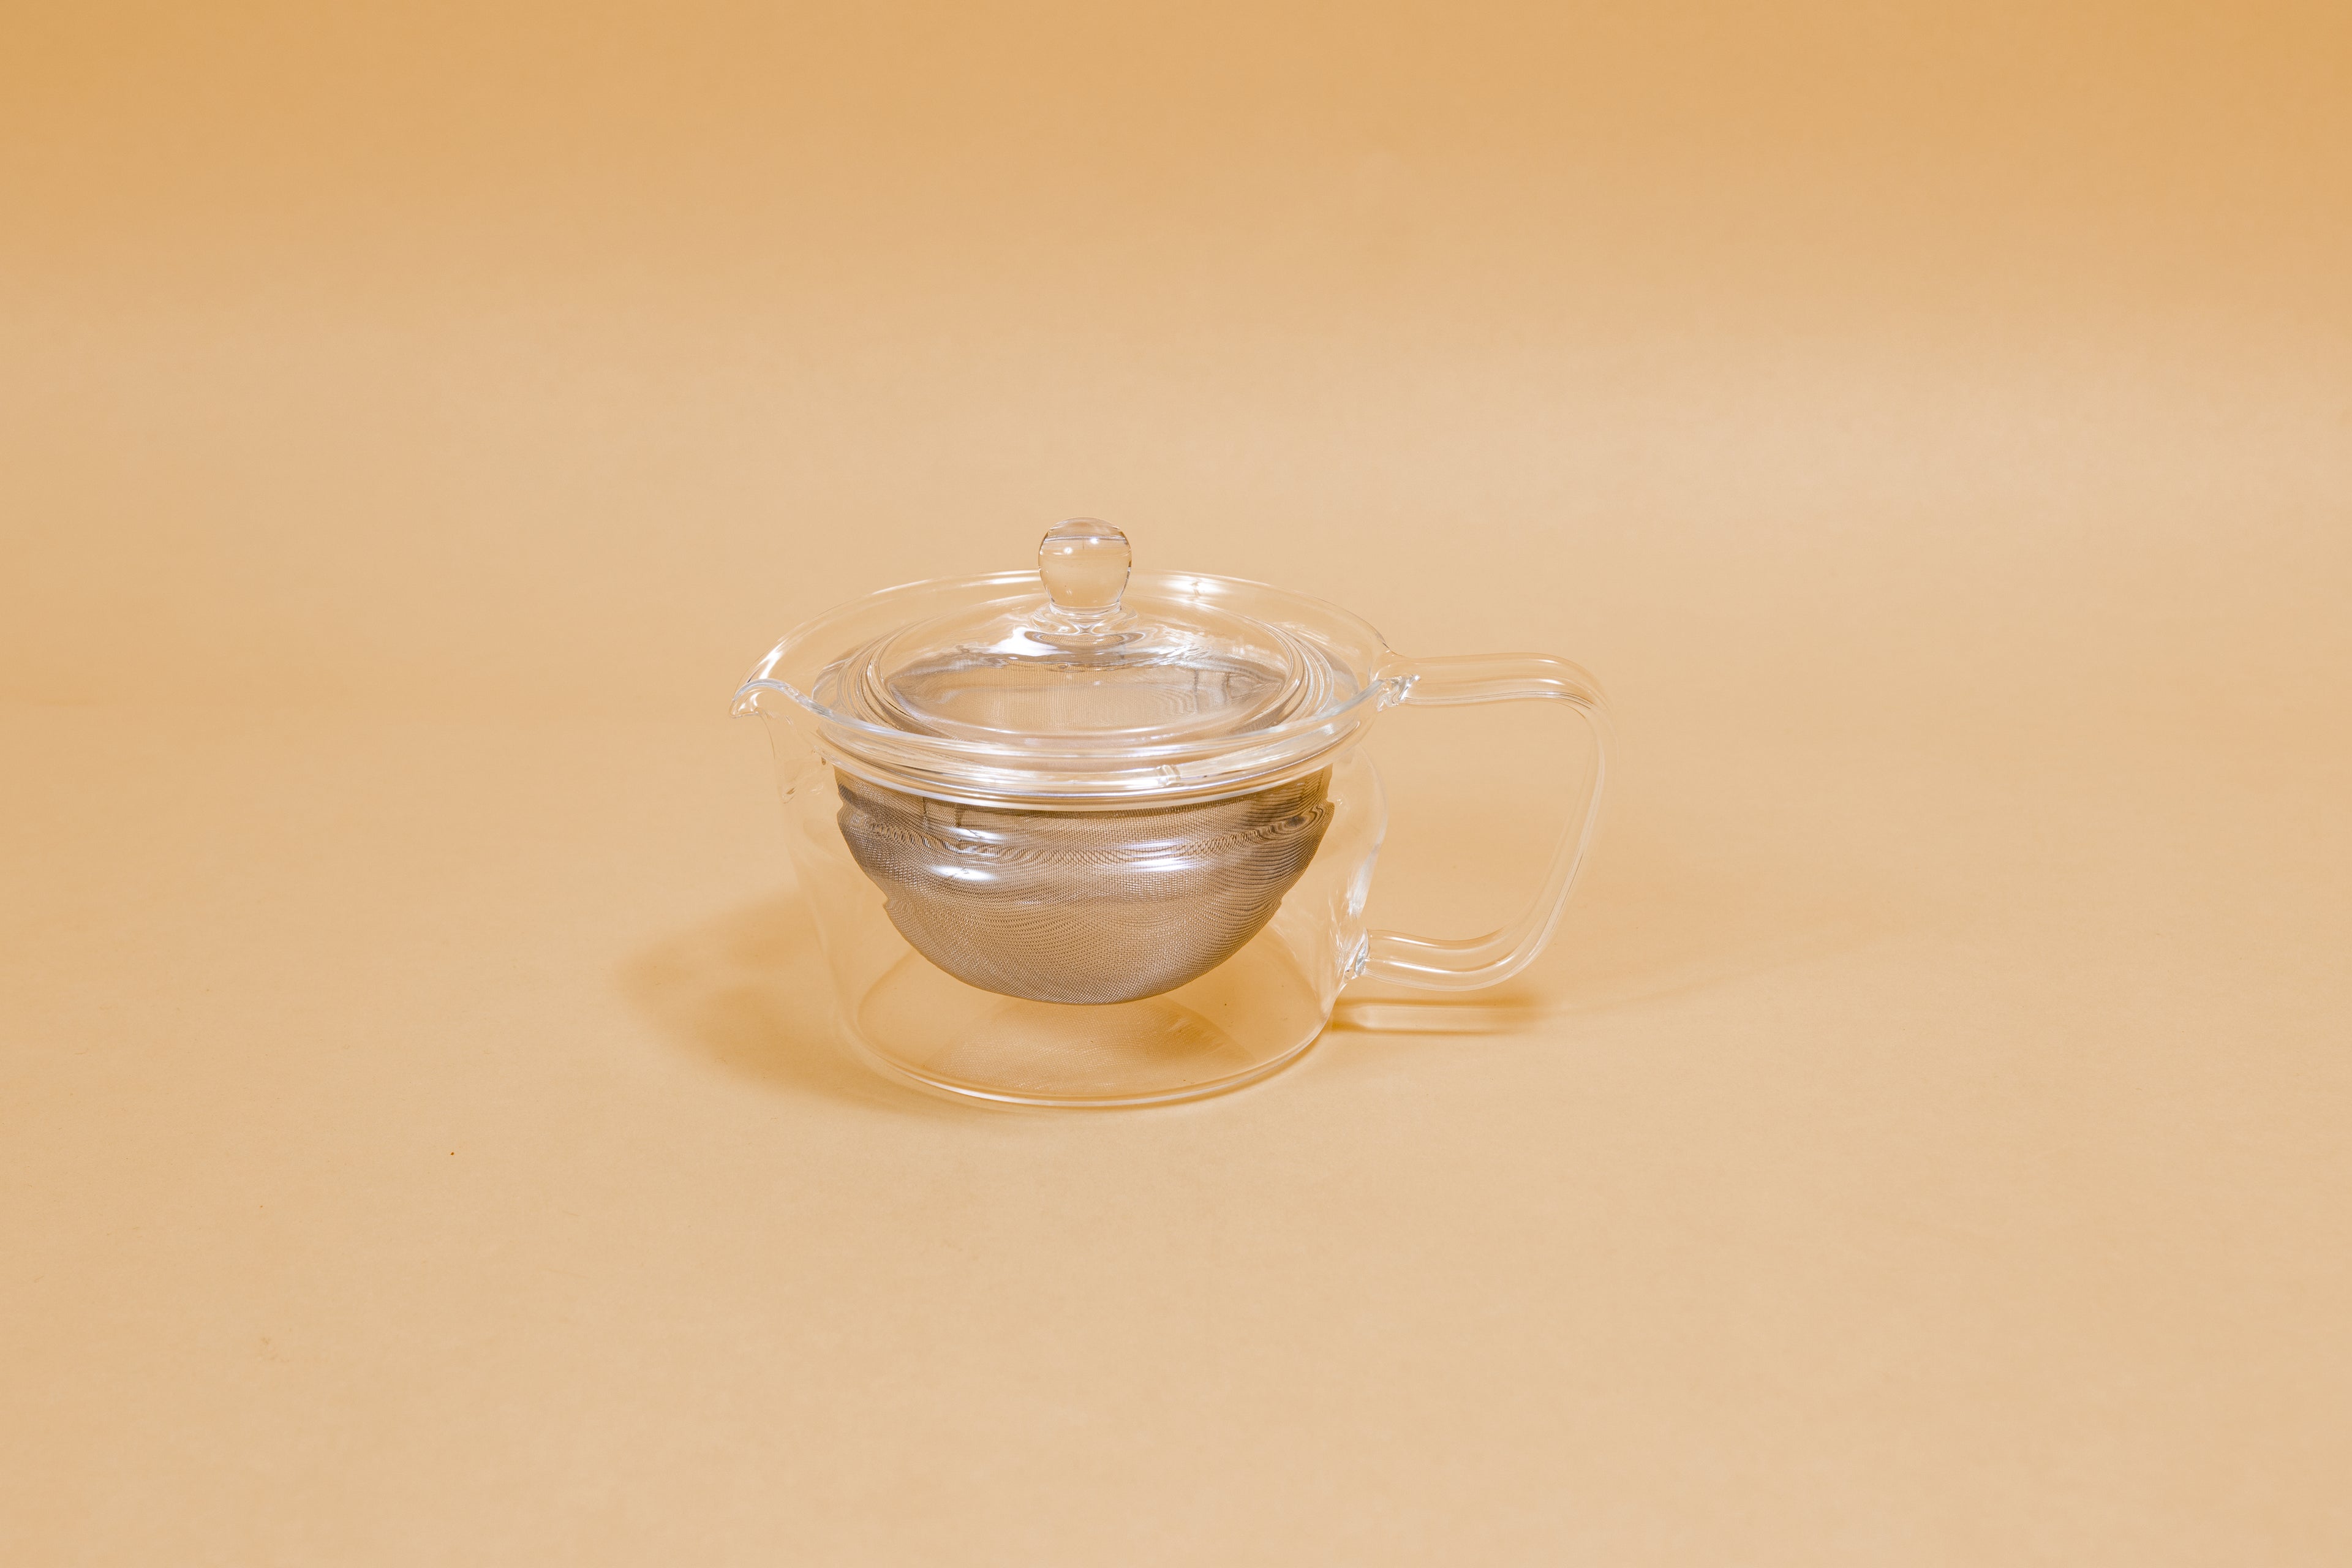 All glass tapered tea pot with flat bottom, all glass lid and handle, and metal mesh filter basket insert.